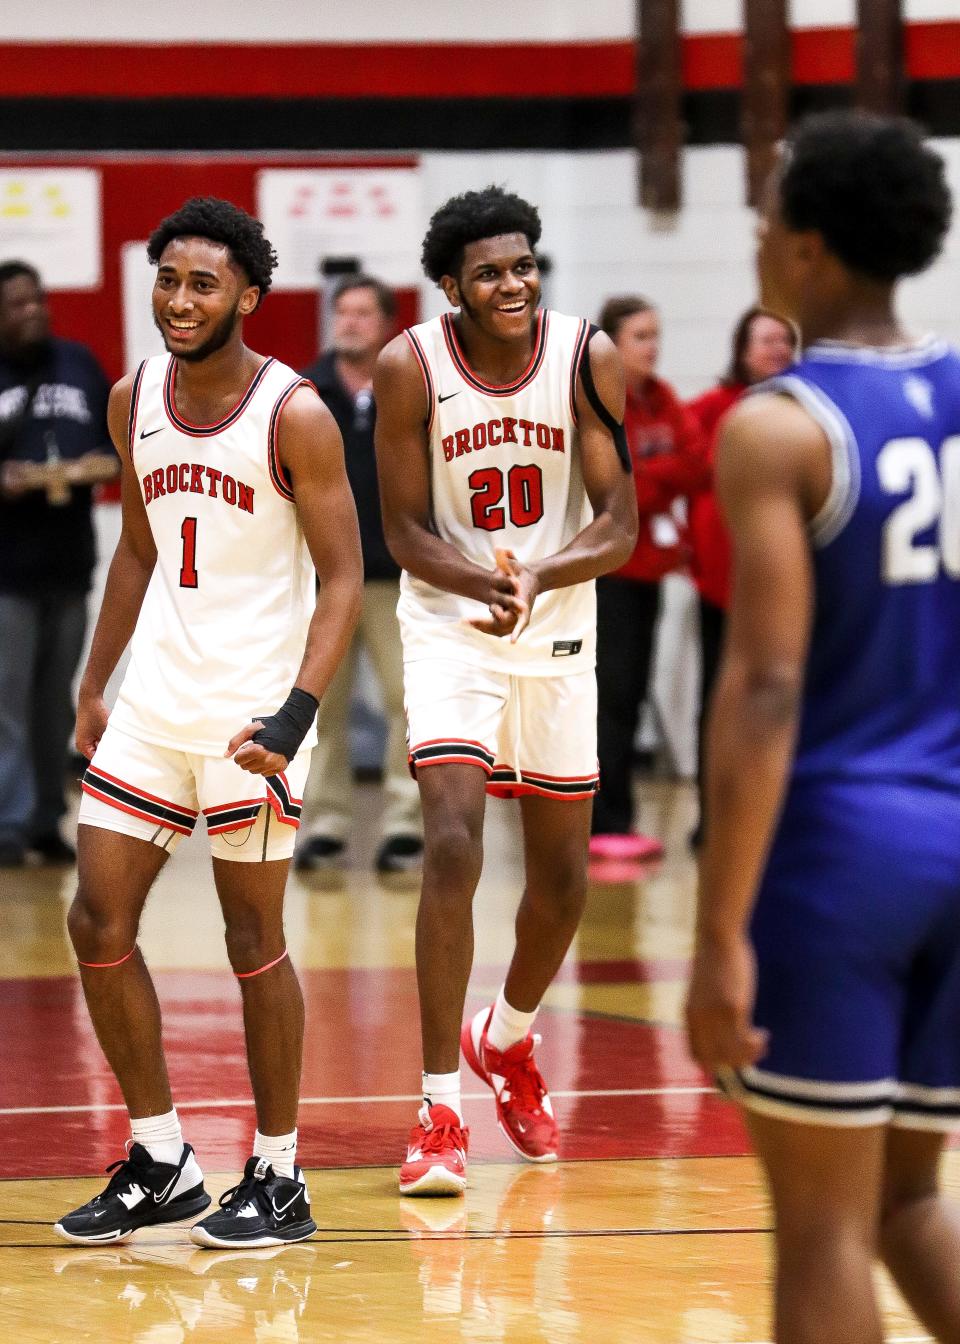 Brockton's Cam Monteiro, left, and Chidi Nwosu celebrate during a game against Methuen in the Round of 32 of the Div. 1 state tournament on Thursday, March 2, 2023.